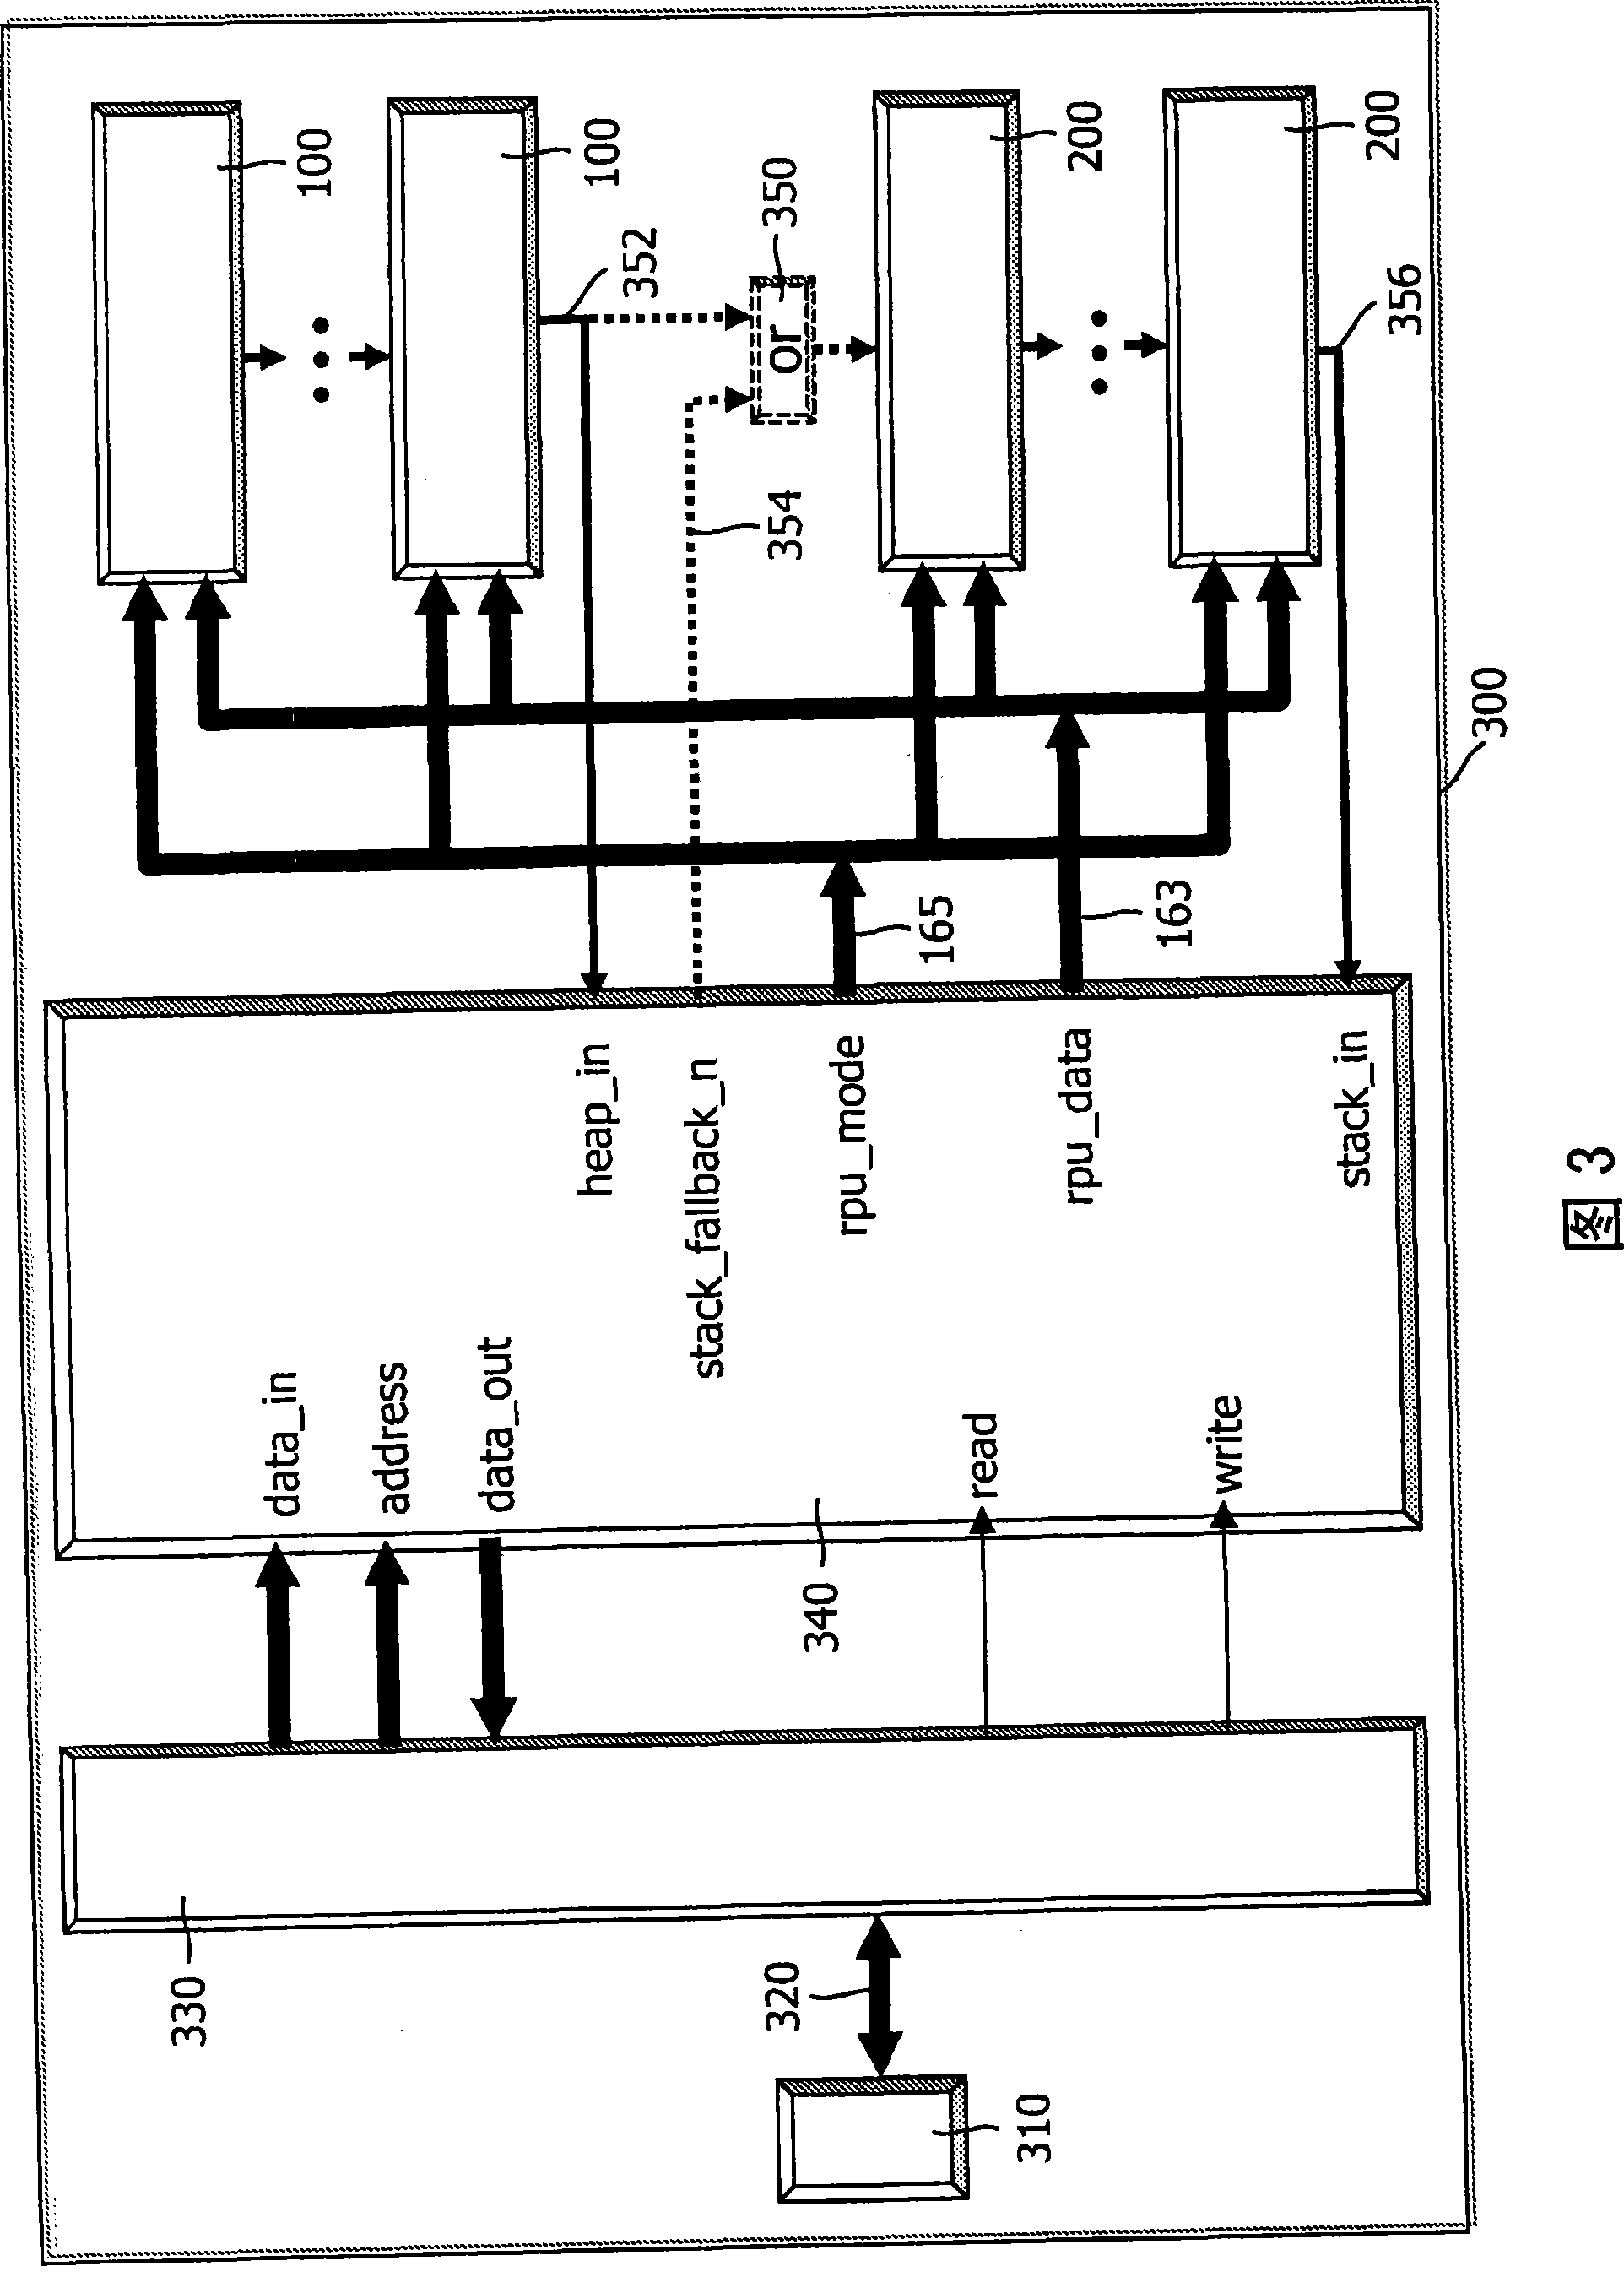 Region protection unit, instruction set and method for protecting a memory region